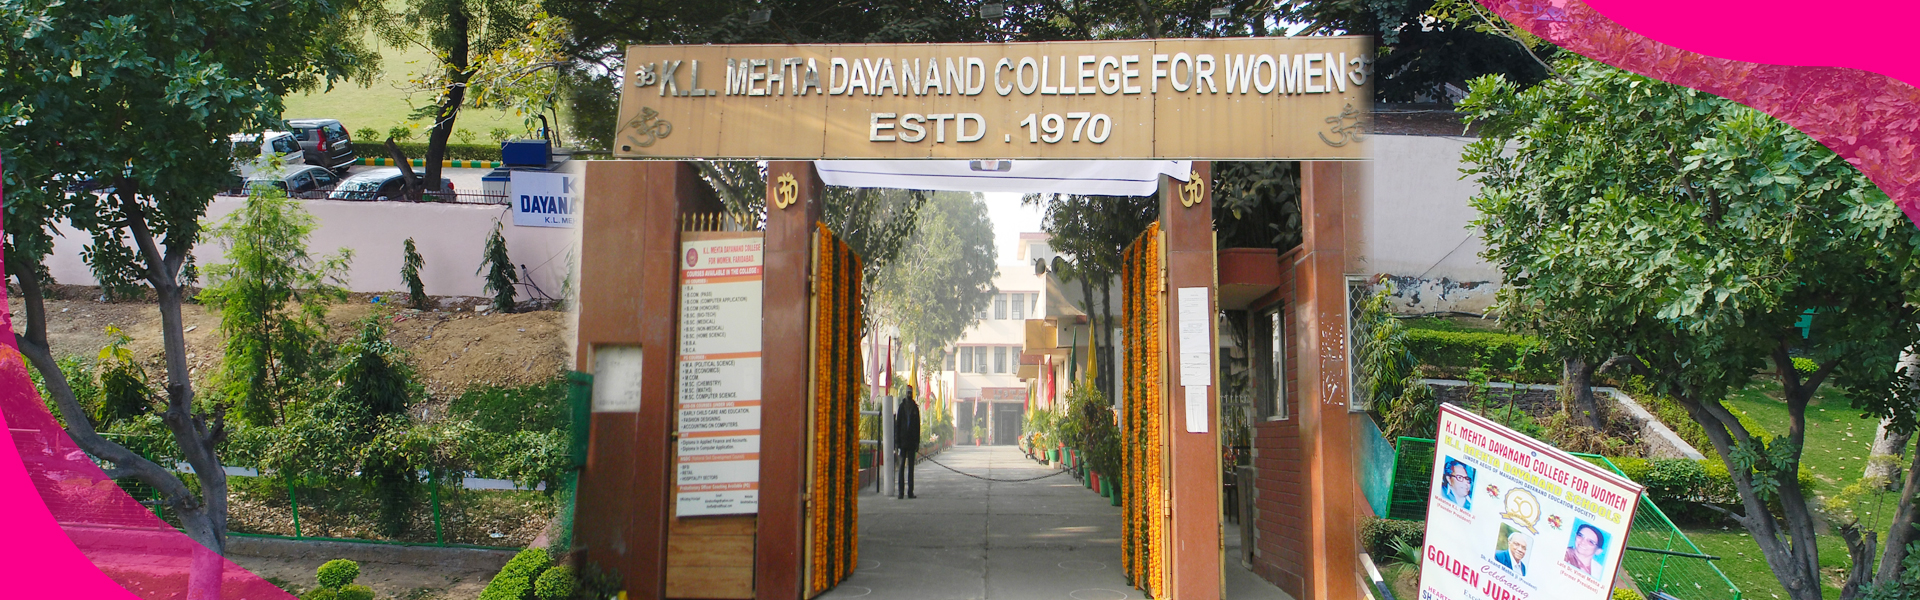 K.L. Mehta Dayanand College For Women, Faridabad Image